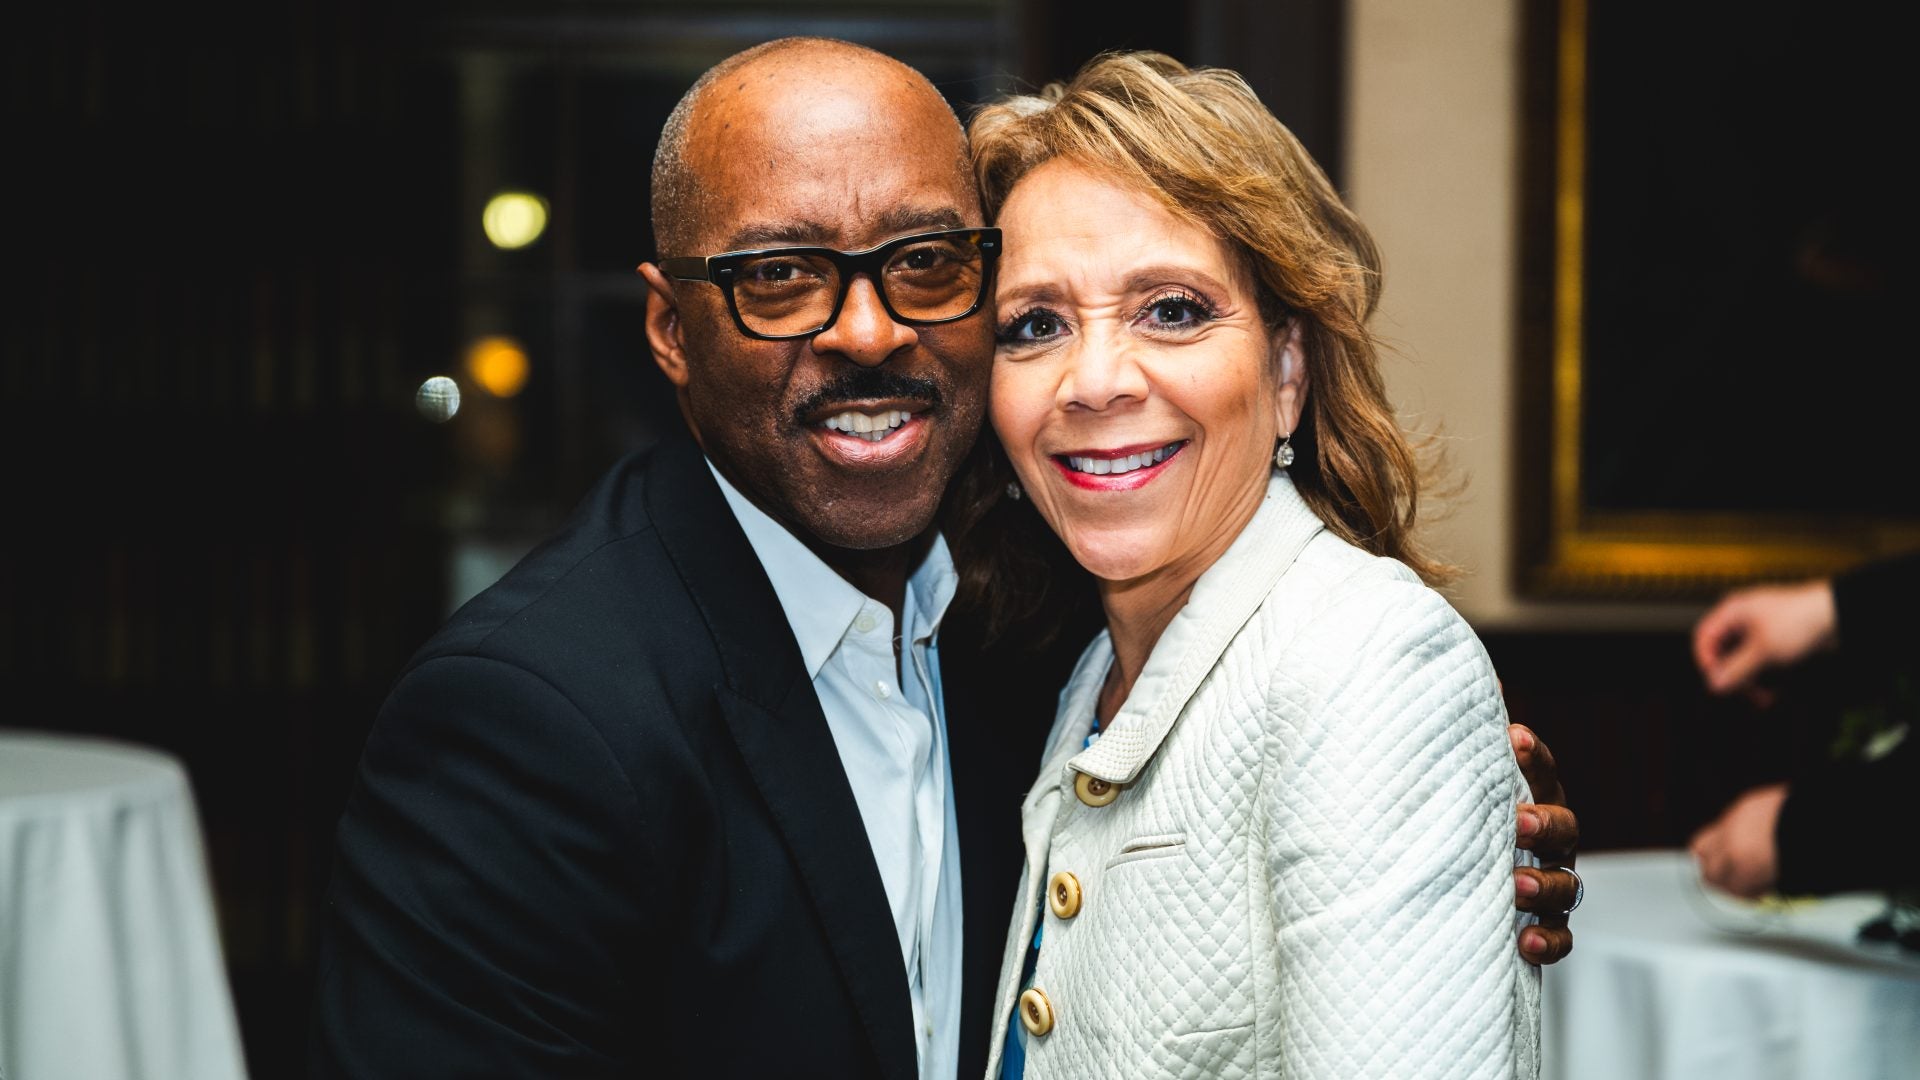 Actor Courtney B. Vance and Dr. Robin L. Smith Center Black Men's Mental Health In Their Book 'The Invisible Ache'